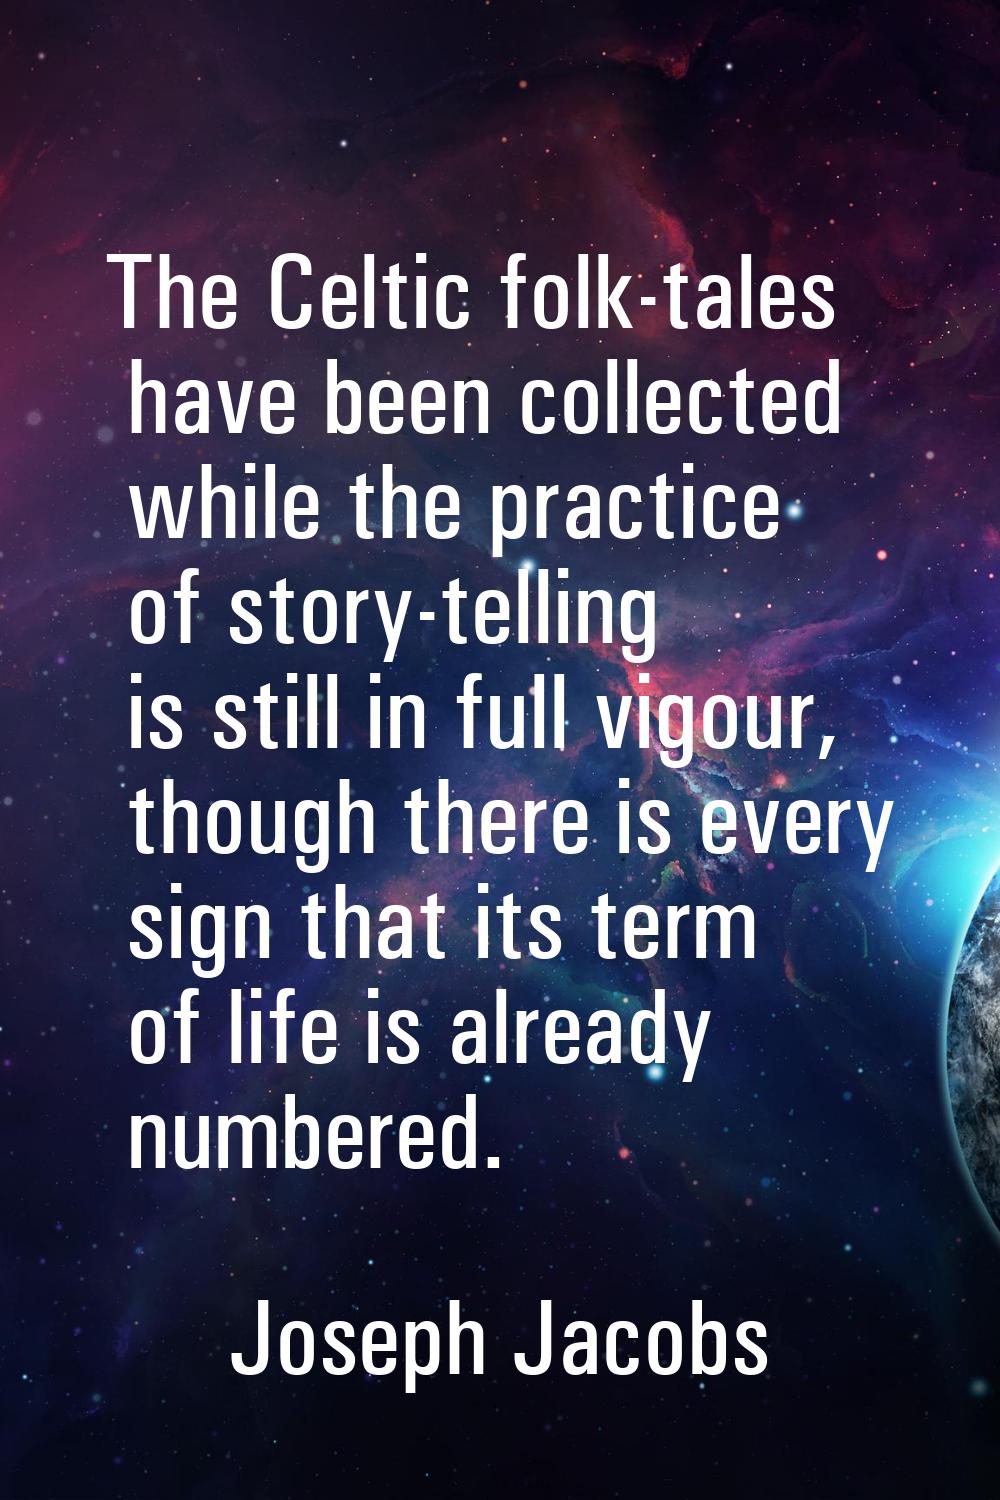 The Celtic folk-tales have been collected while the practice of story-telling is still in full vigo